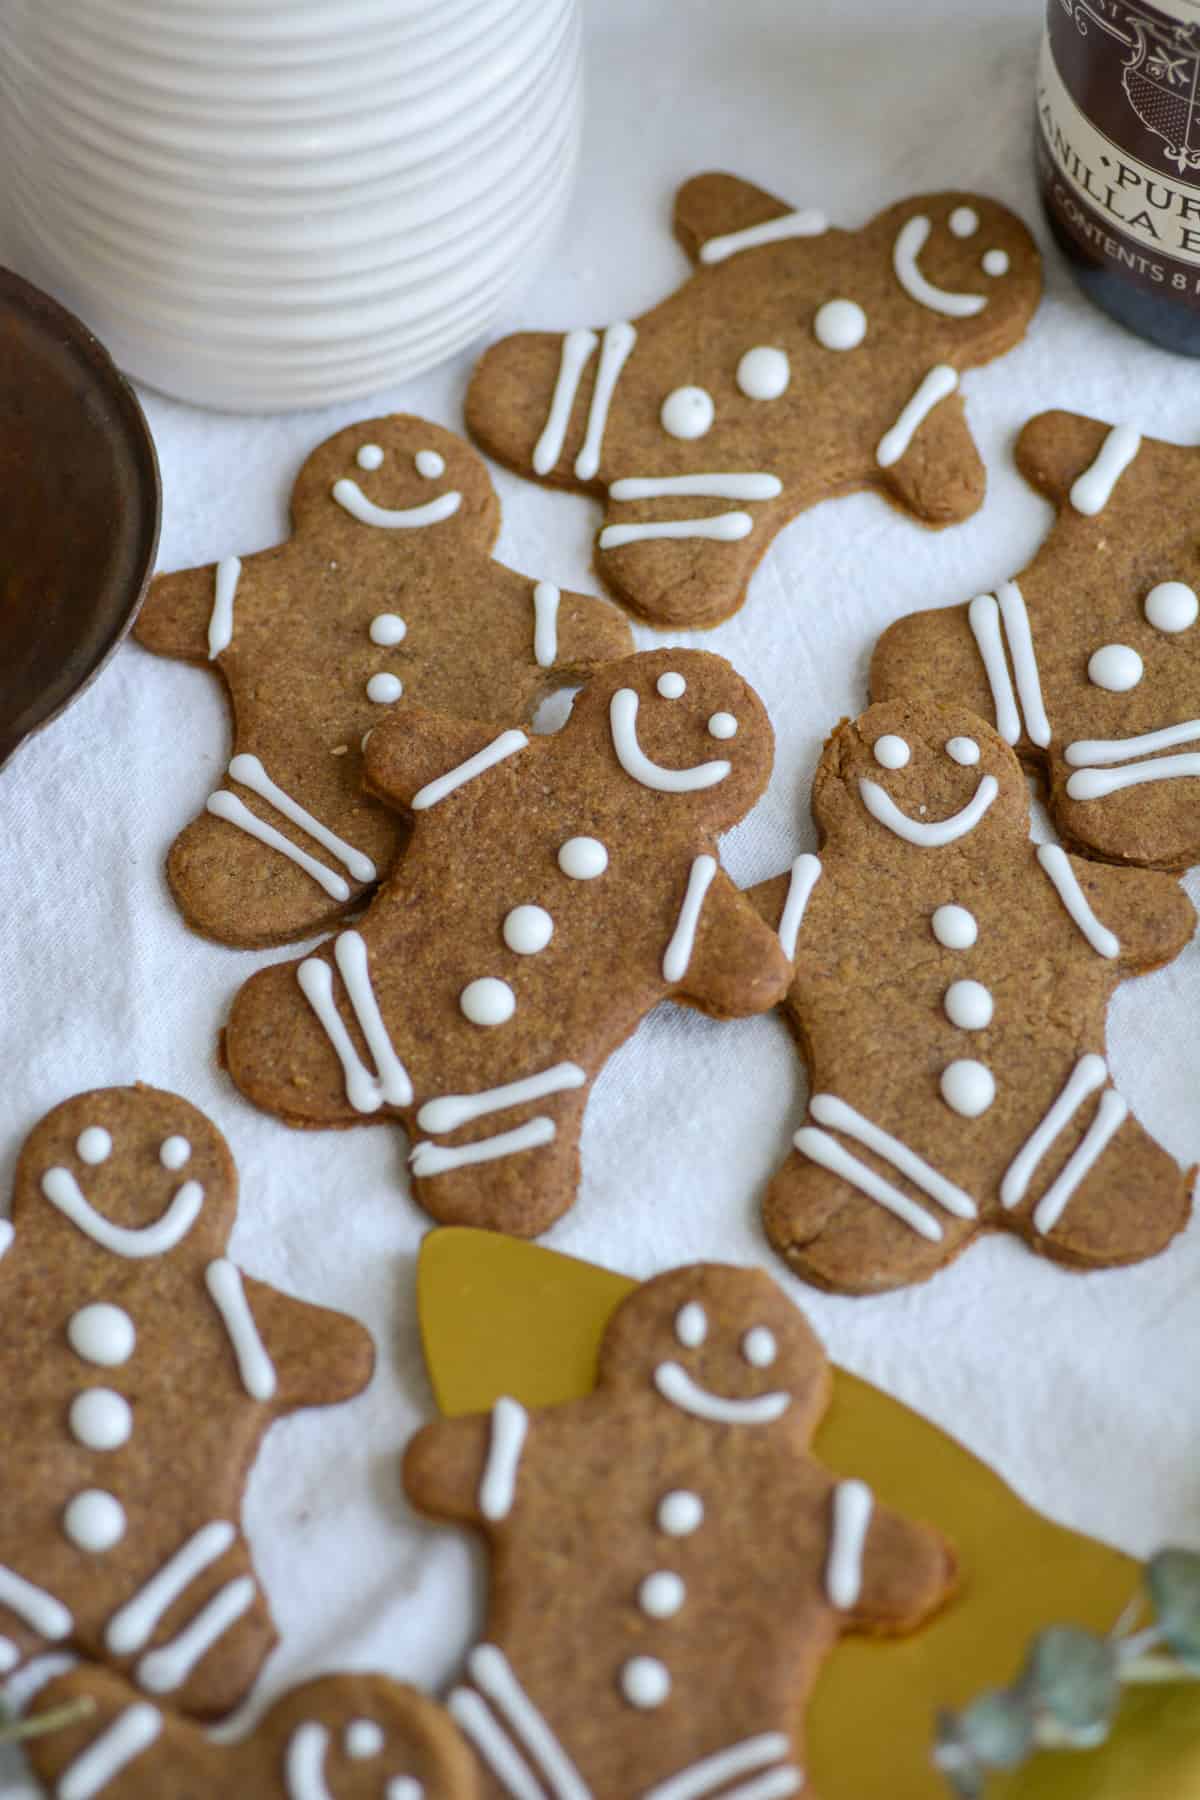 Vegan Dairy-Free Gingerbread Cookies laid out on a white cloth.